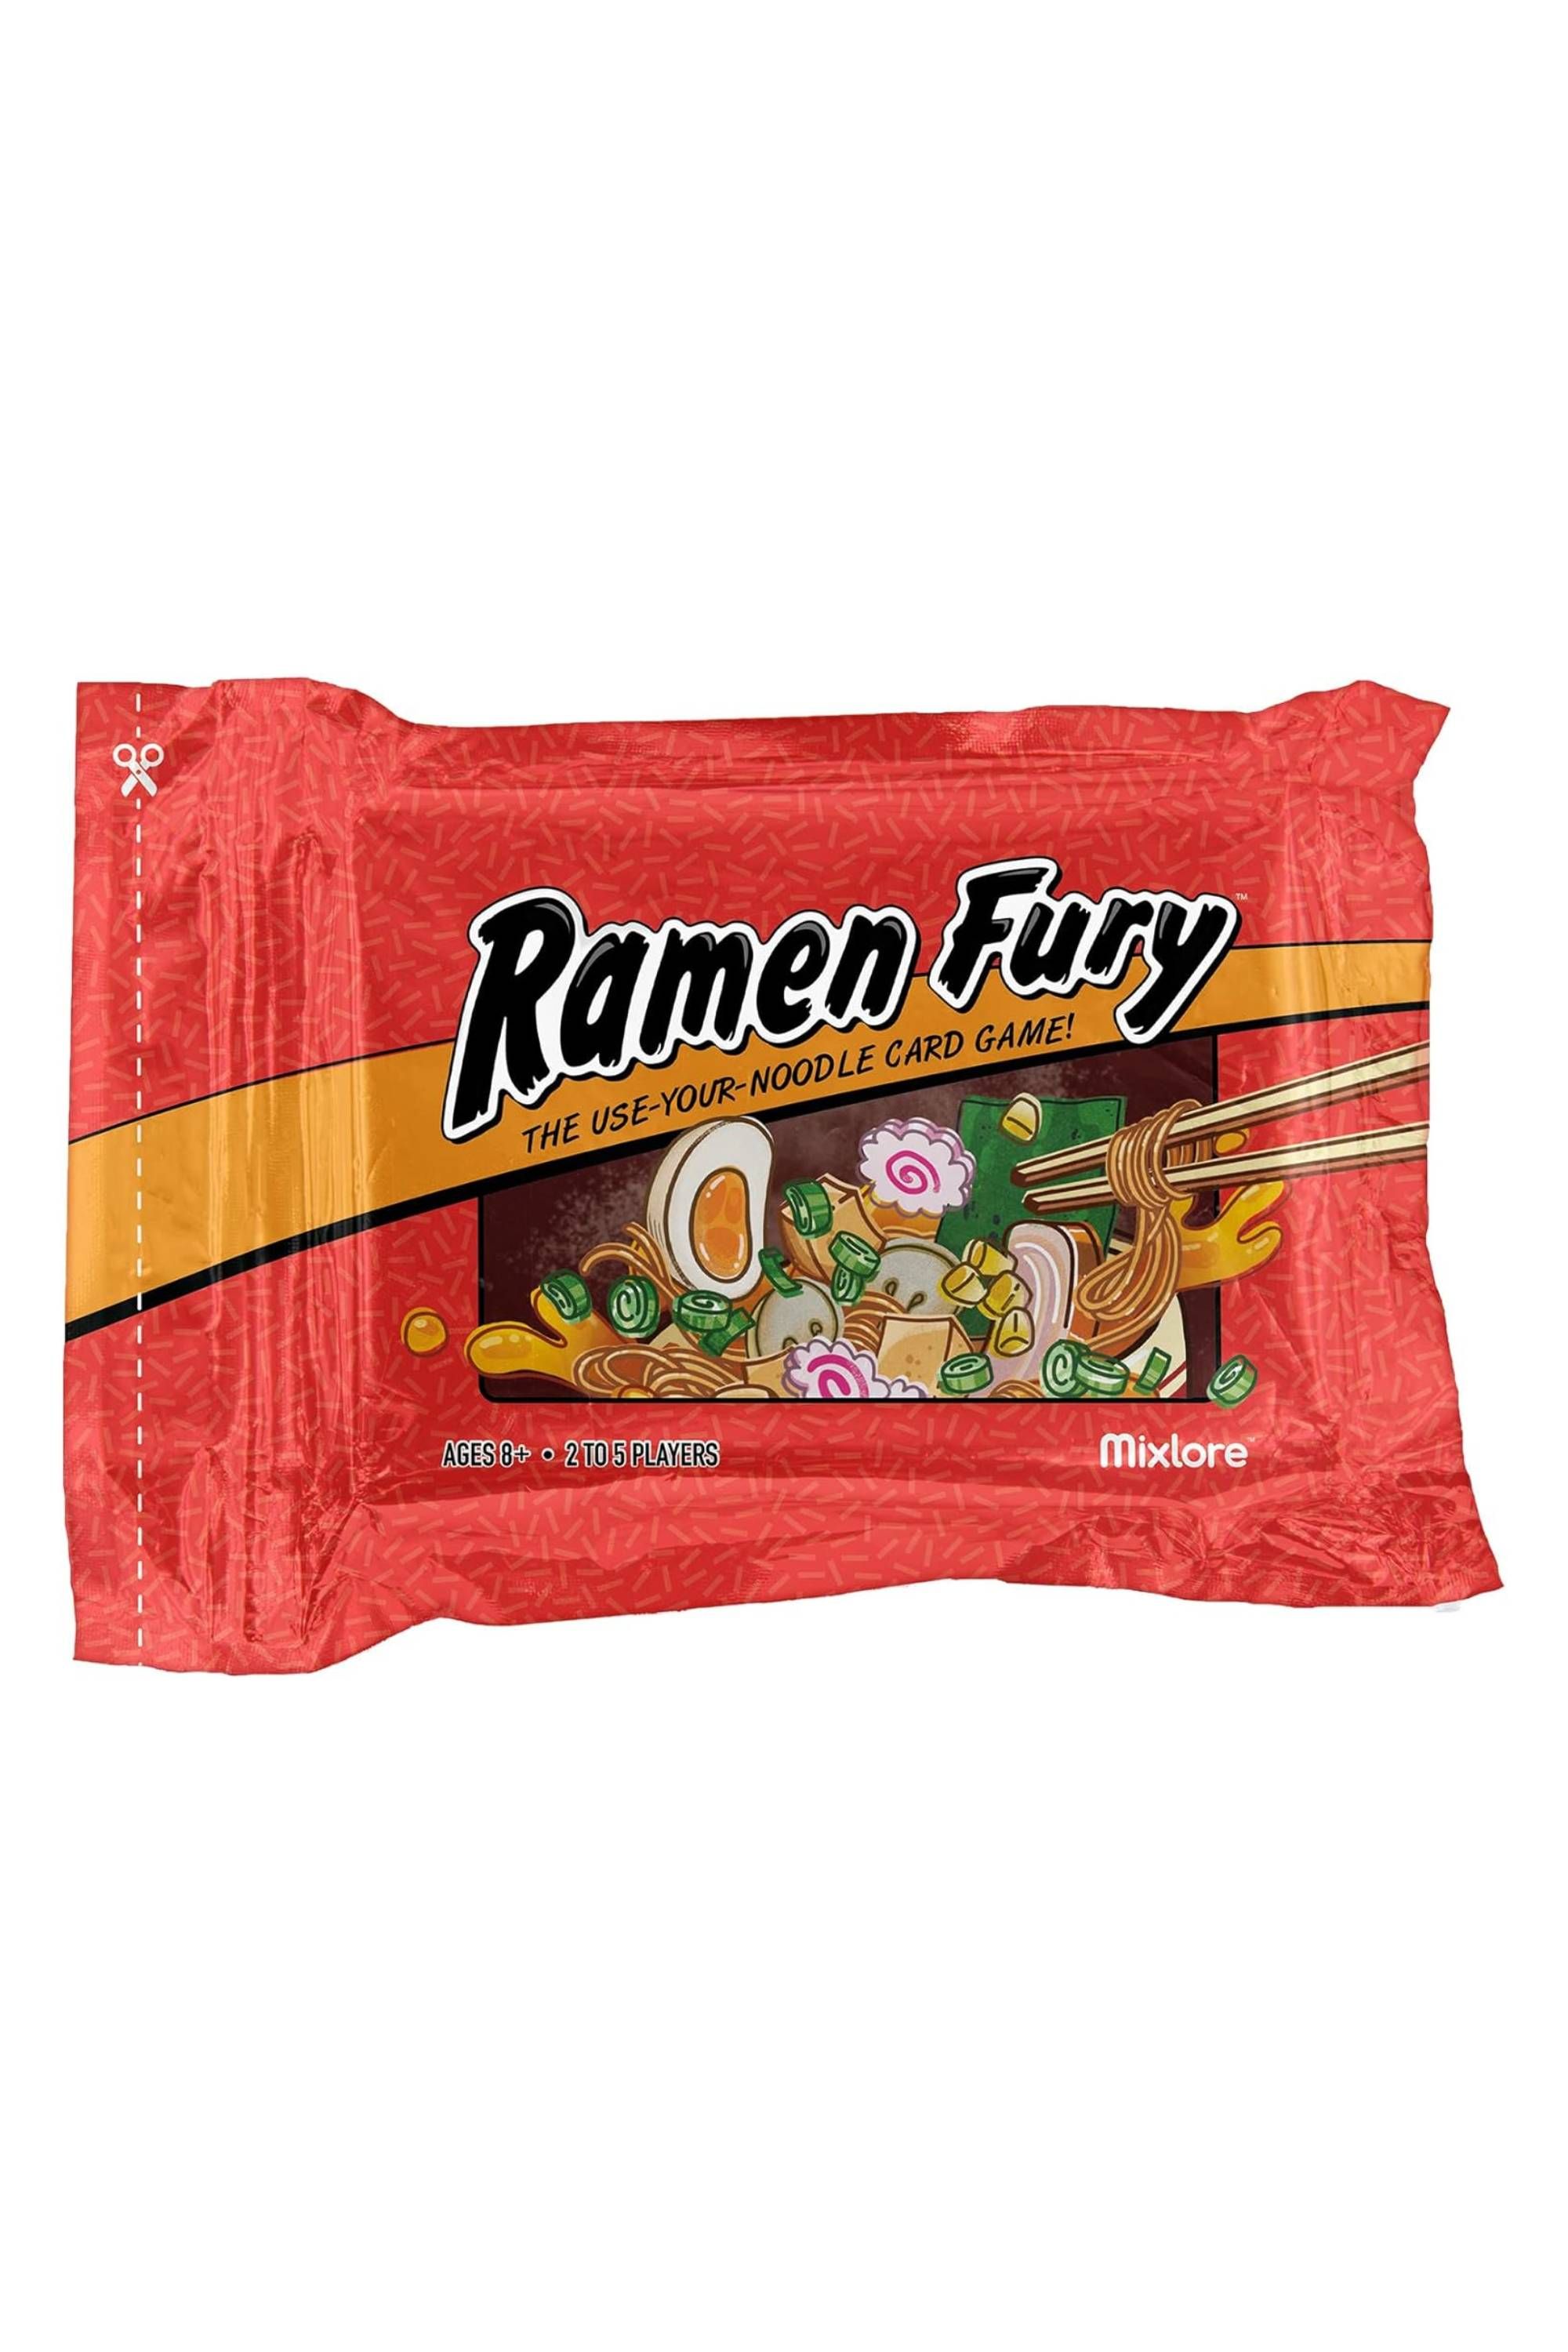 Ramen Fury - The Use-Your-Noodle Card Game